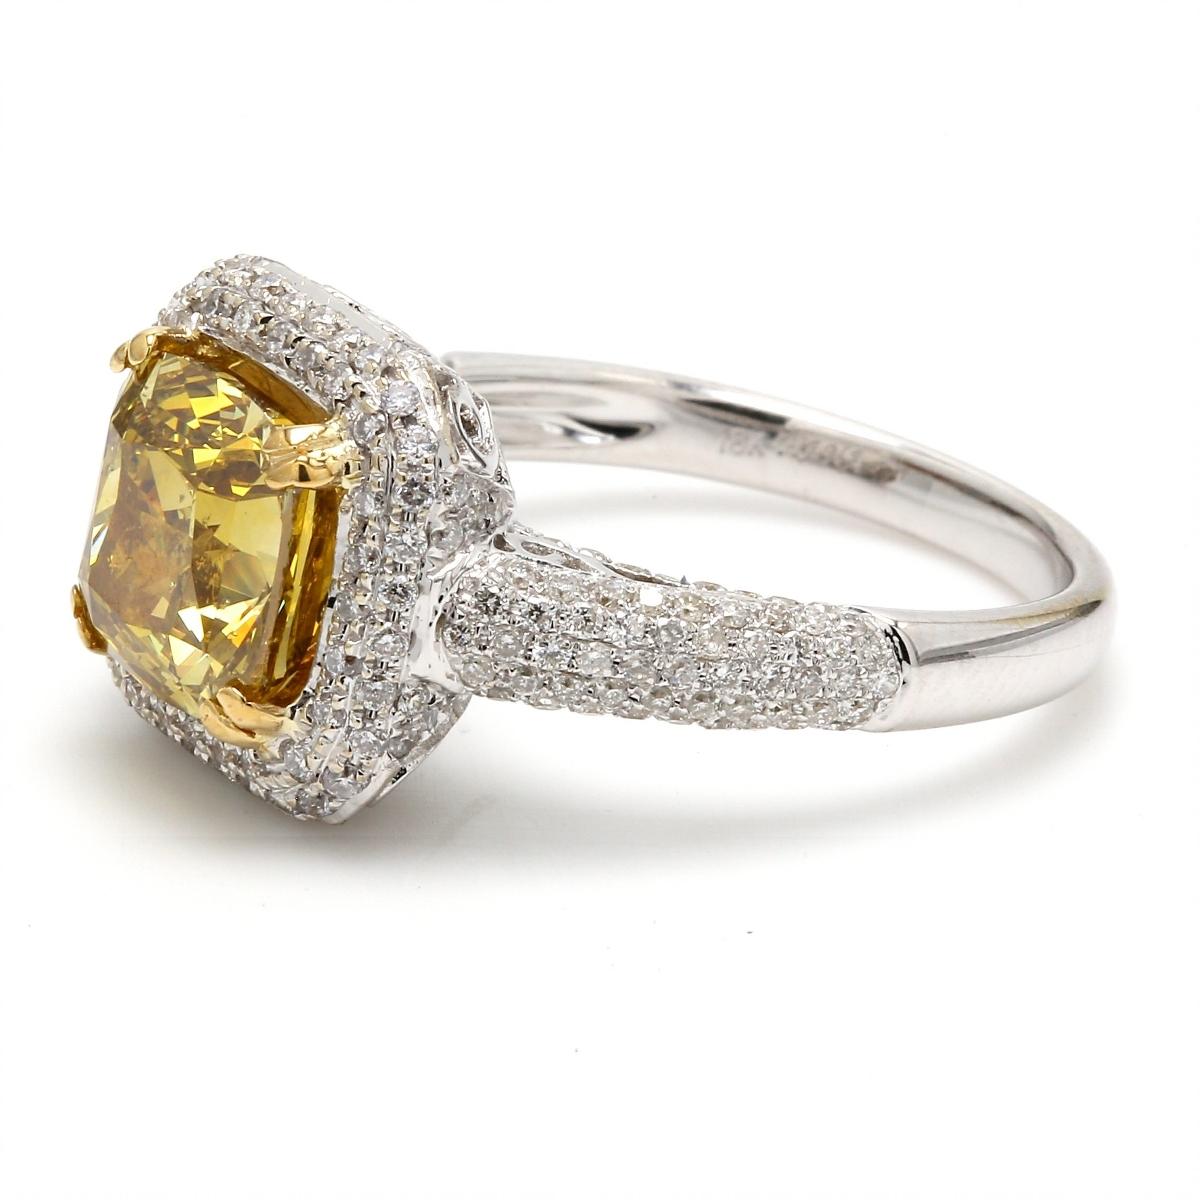 Halo ring in 18K two-tone with GIA certified Fancy Deep Brownish Yellow/SI2 cushion cut center and French pave set round diamonds.  D3.59ct.t.w.  (Center 2.83ct.)  Size 6.25